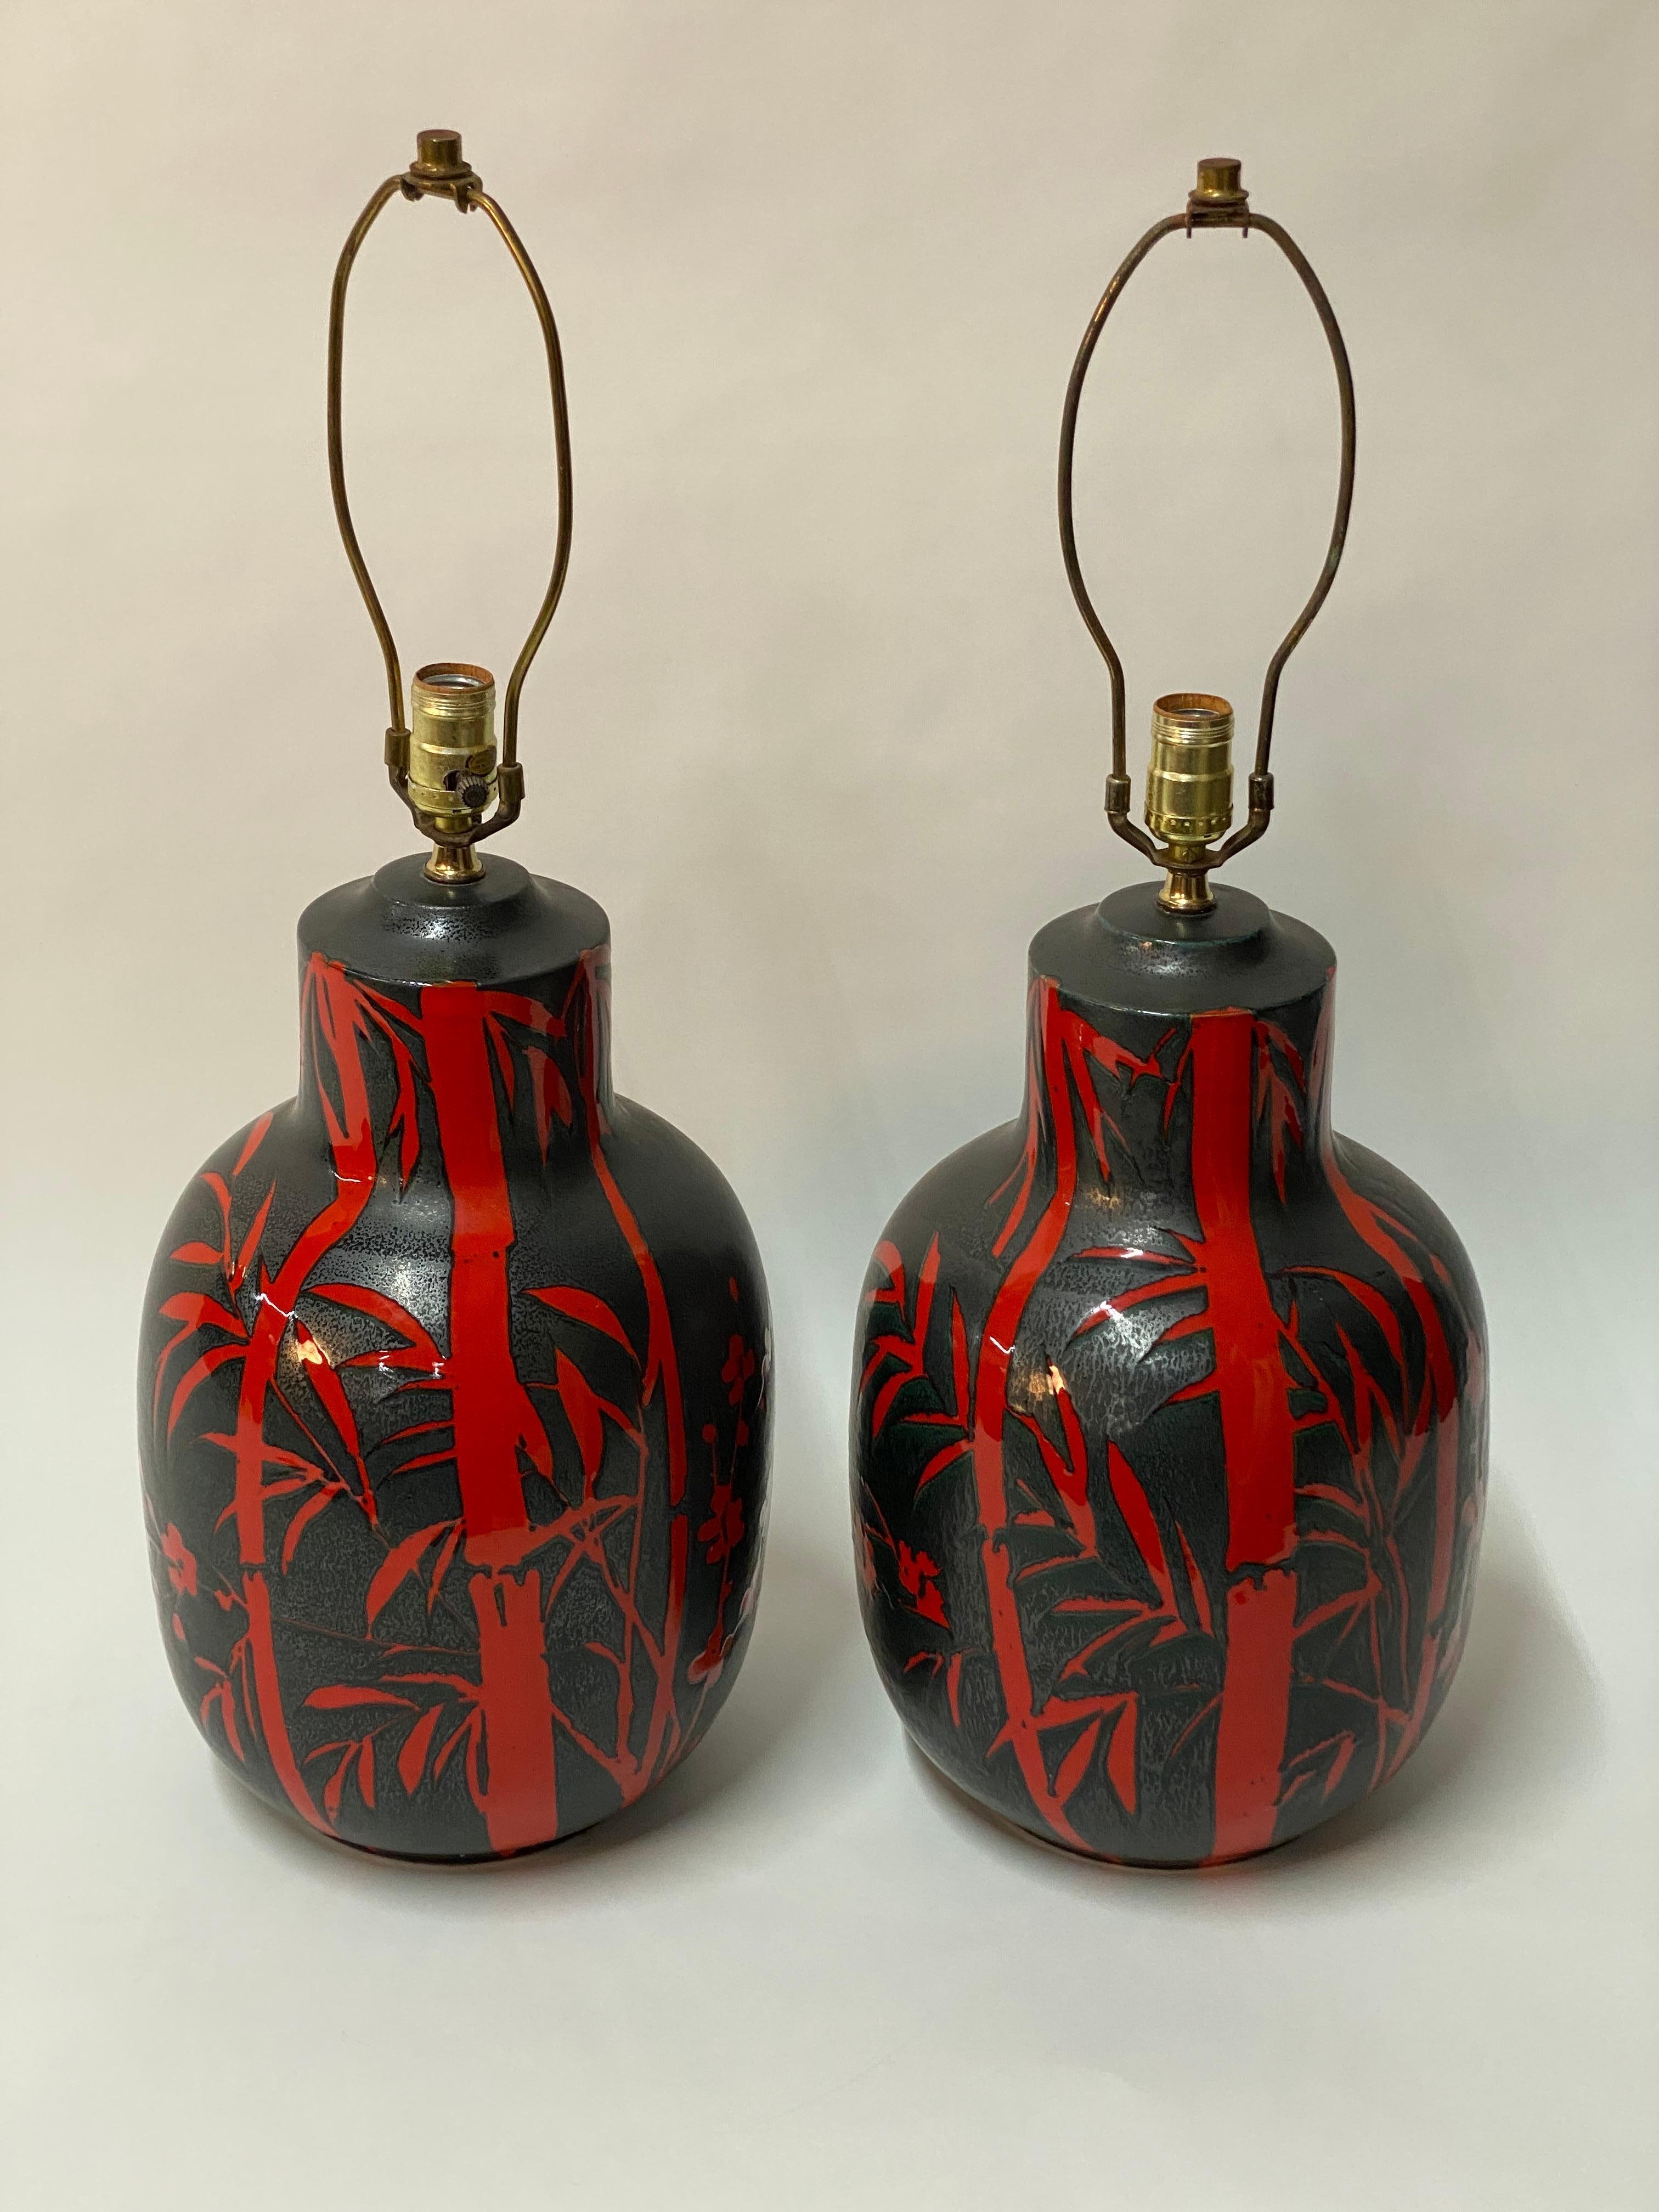 Stunning pair of Alvino Bagni Bitossi Italian pottery table lamps. Decorated and glazed in a speckled gunmetal charcoal gray/black and vermillion. The decor in red is bamboo, butterflies and peach blossom type flowers. Photos do not do the